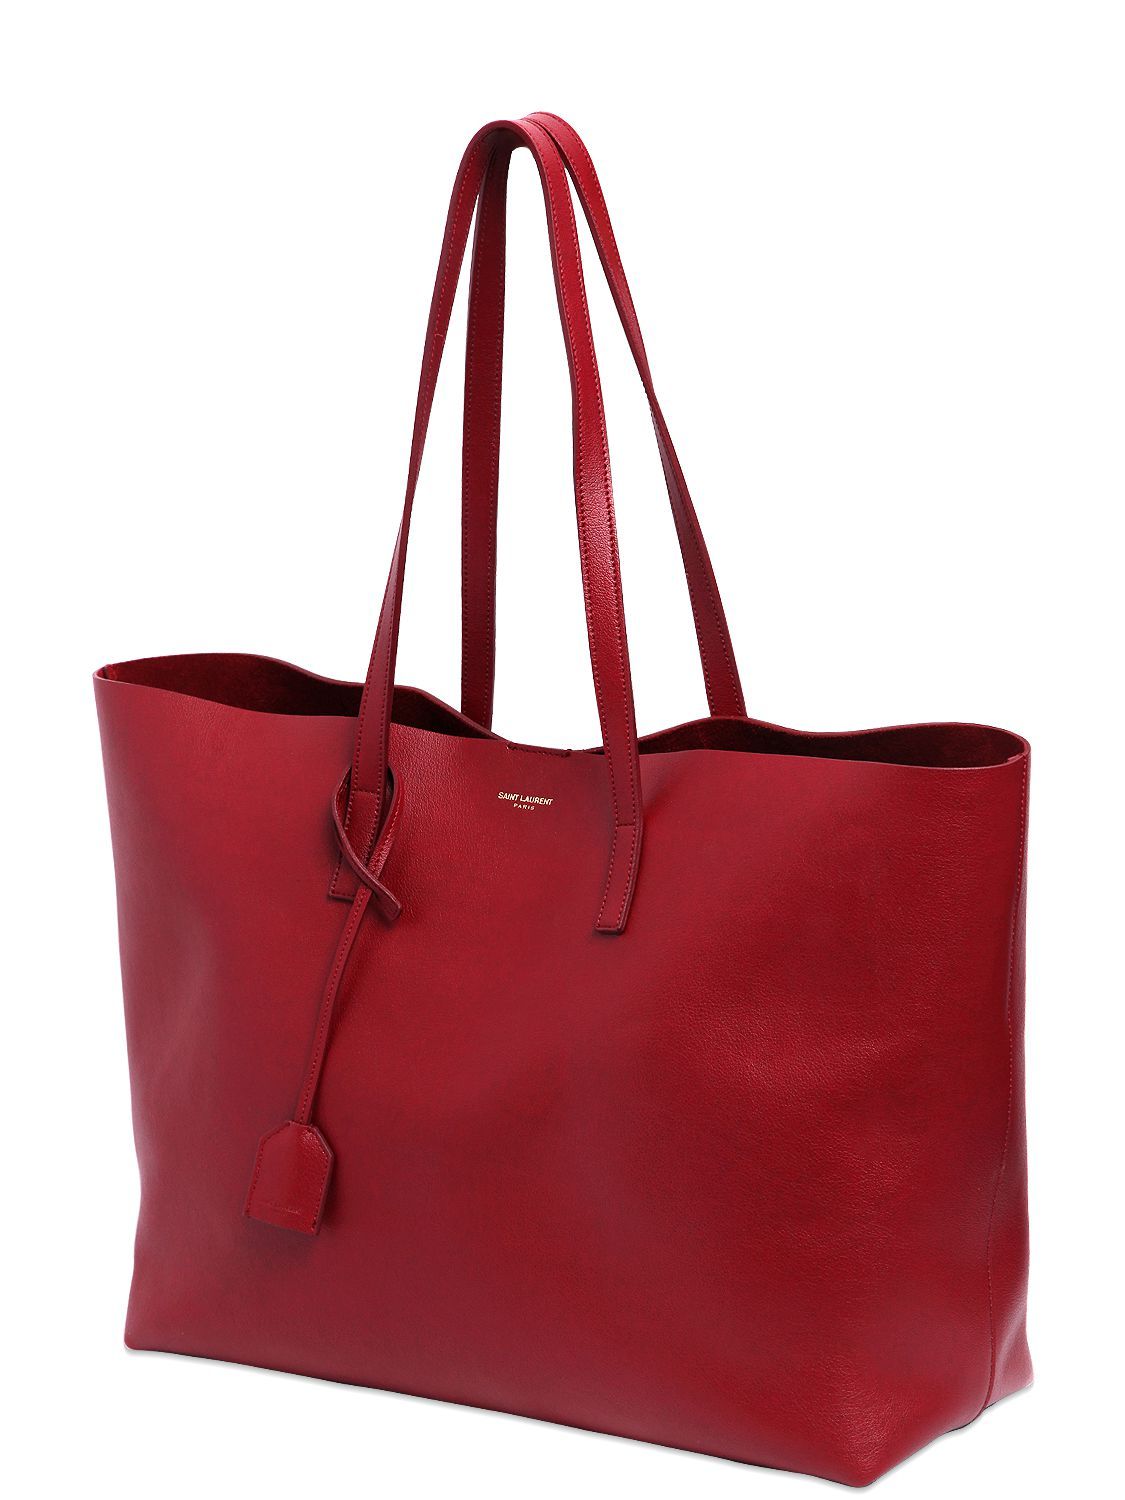 red travel tote bag